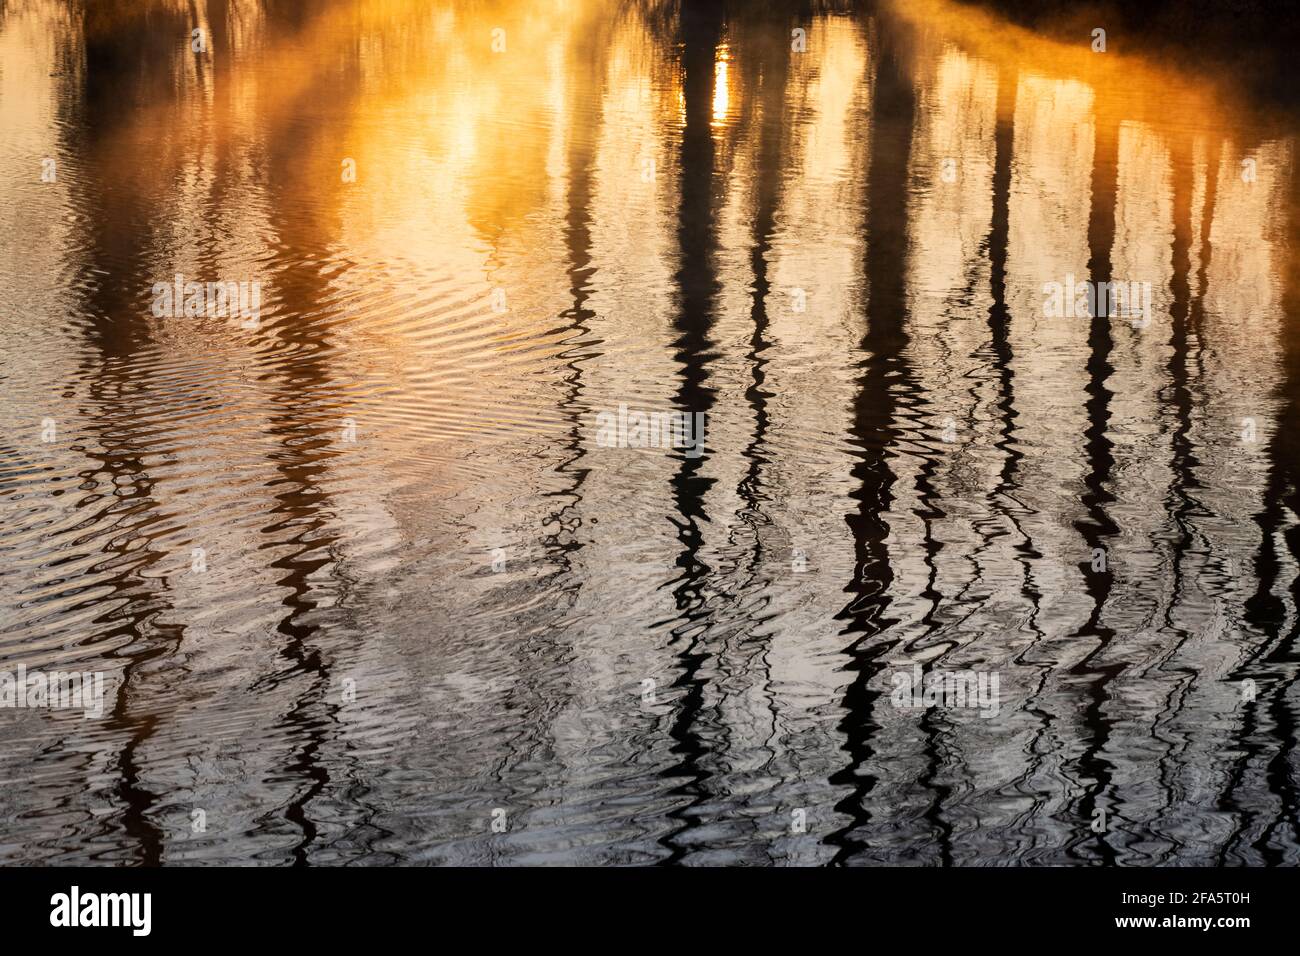 Misty sunrise ripples with trees reflecting in the river thames. Buscot, Cotswolds, Oxfordshire, England Stock Photo